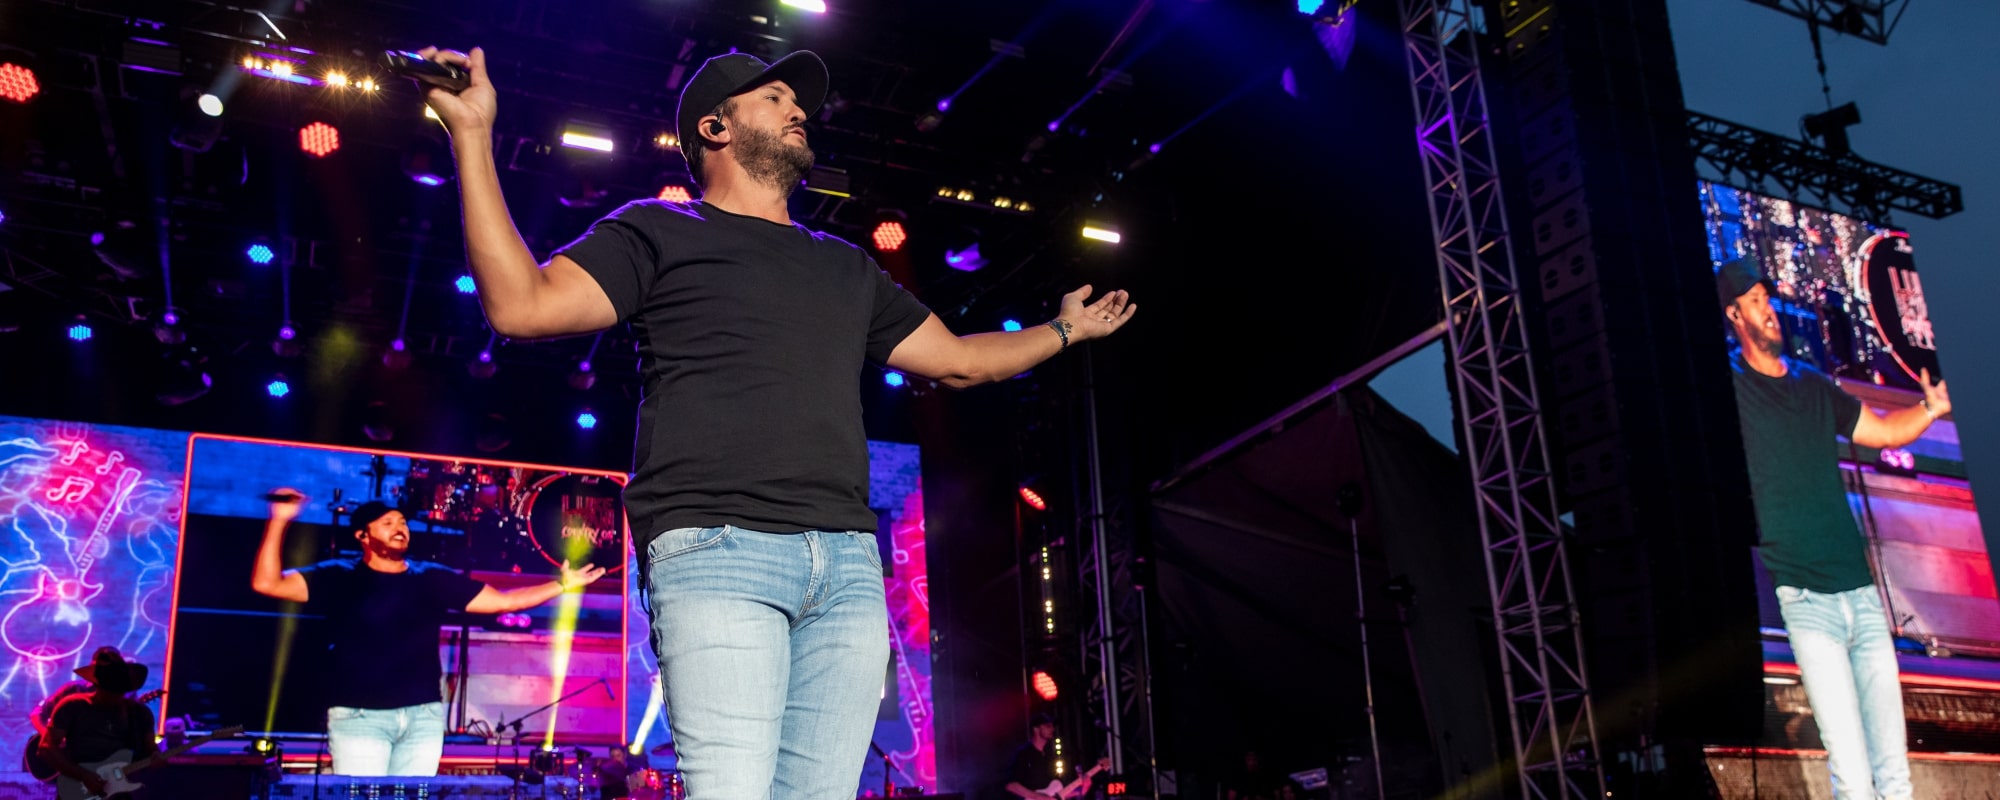 Luke Bryan Continues Social Media Battle with Critics Over His October 14 St. Paul Concert “You Can Kiss My A–“